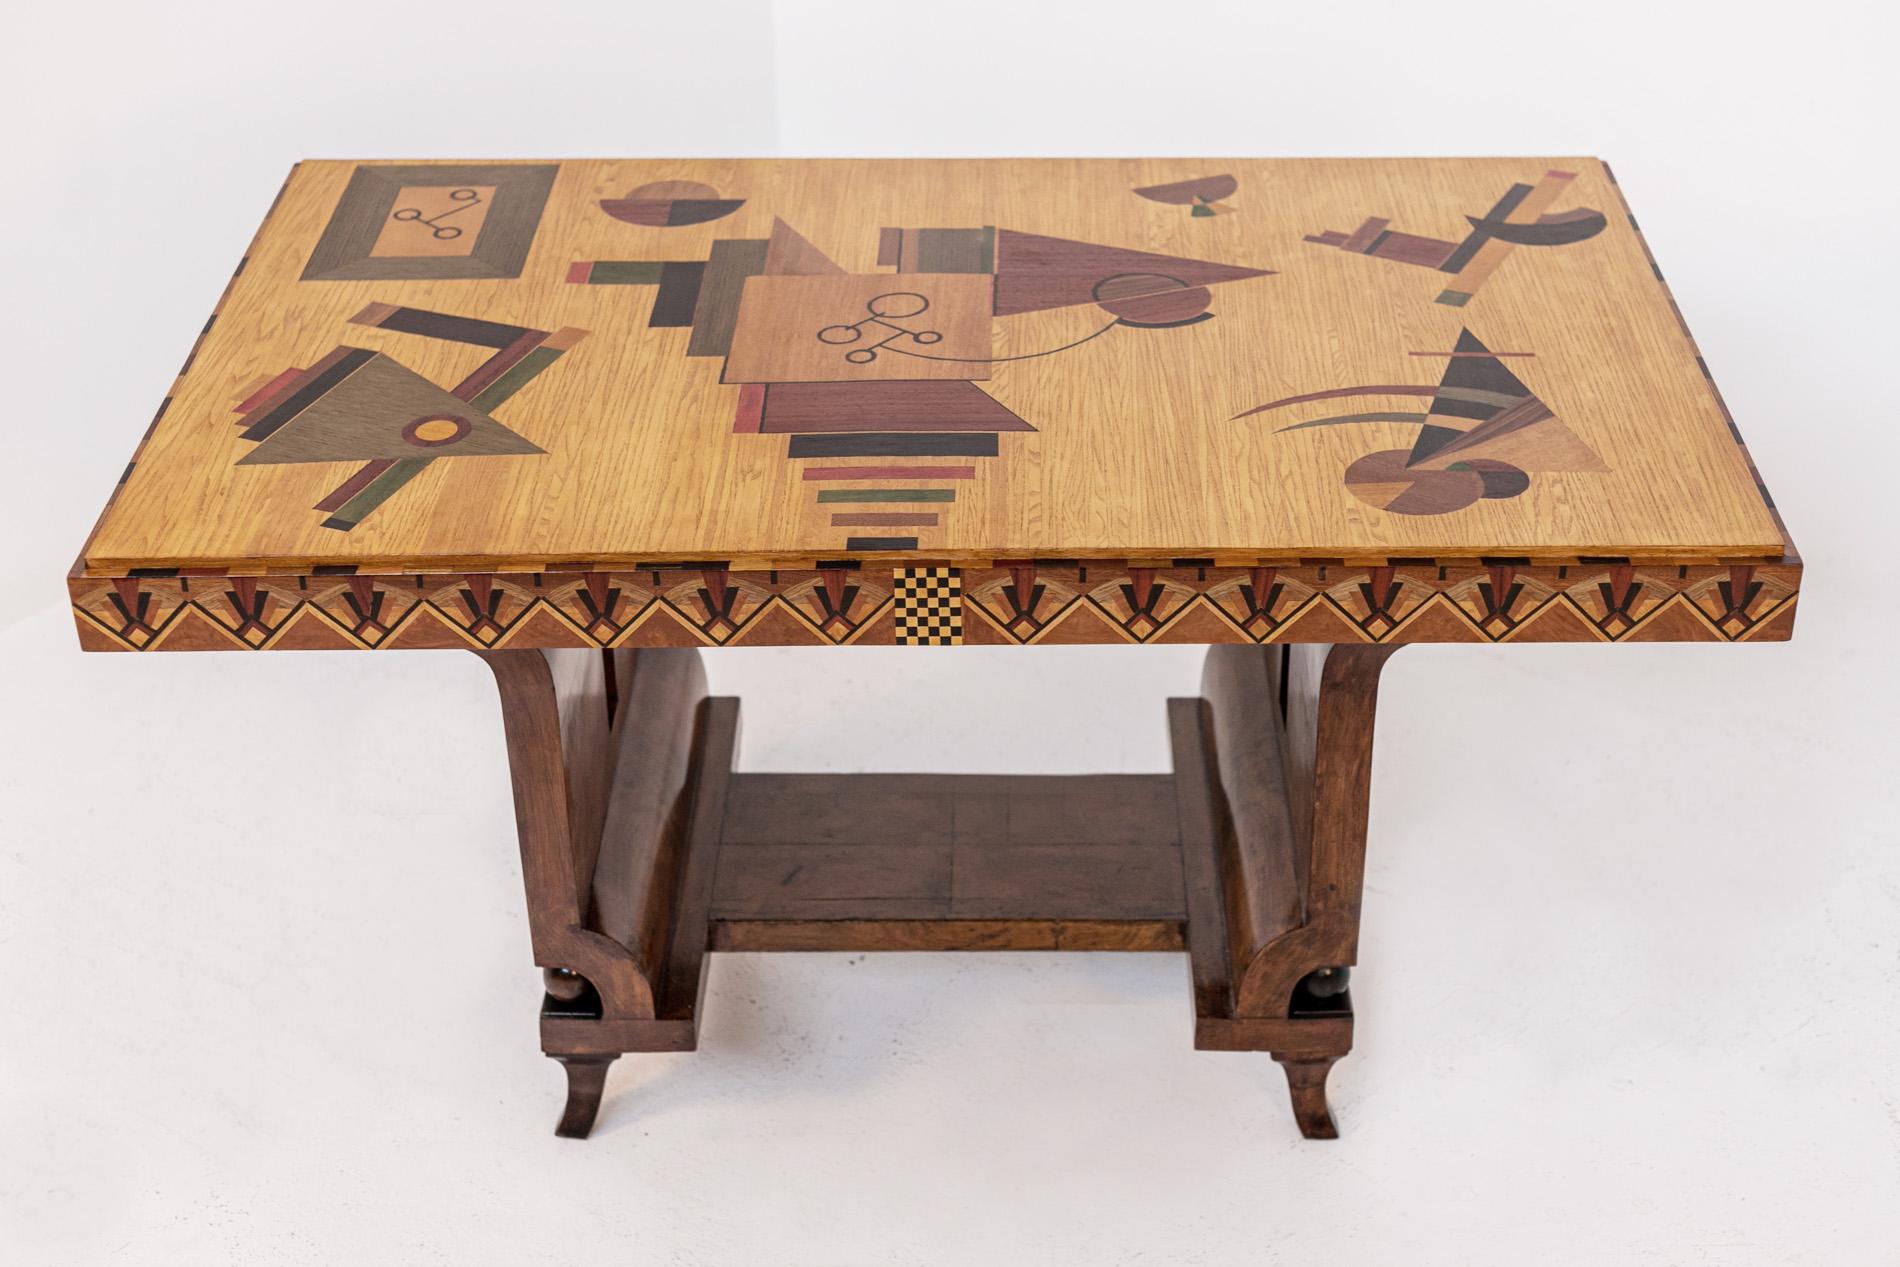 This stunning table by Italian artist Mauro Varotti from the 2000s is inspired by the work of futurist artist Fortunato Depero and his dynamic creations. The simple structure, is made of honeycomb wood and fully decorated with a series of inlays